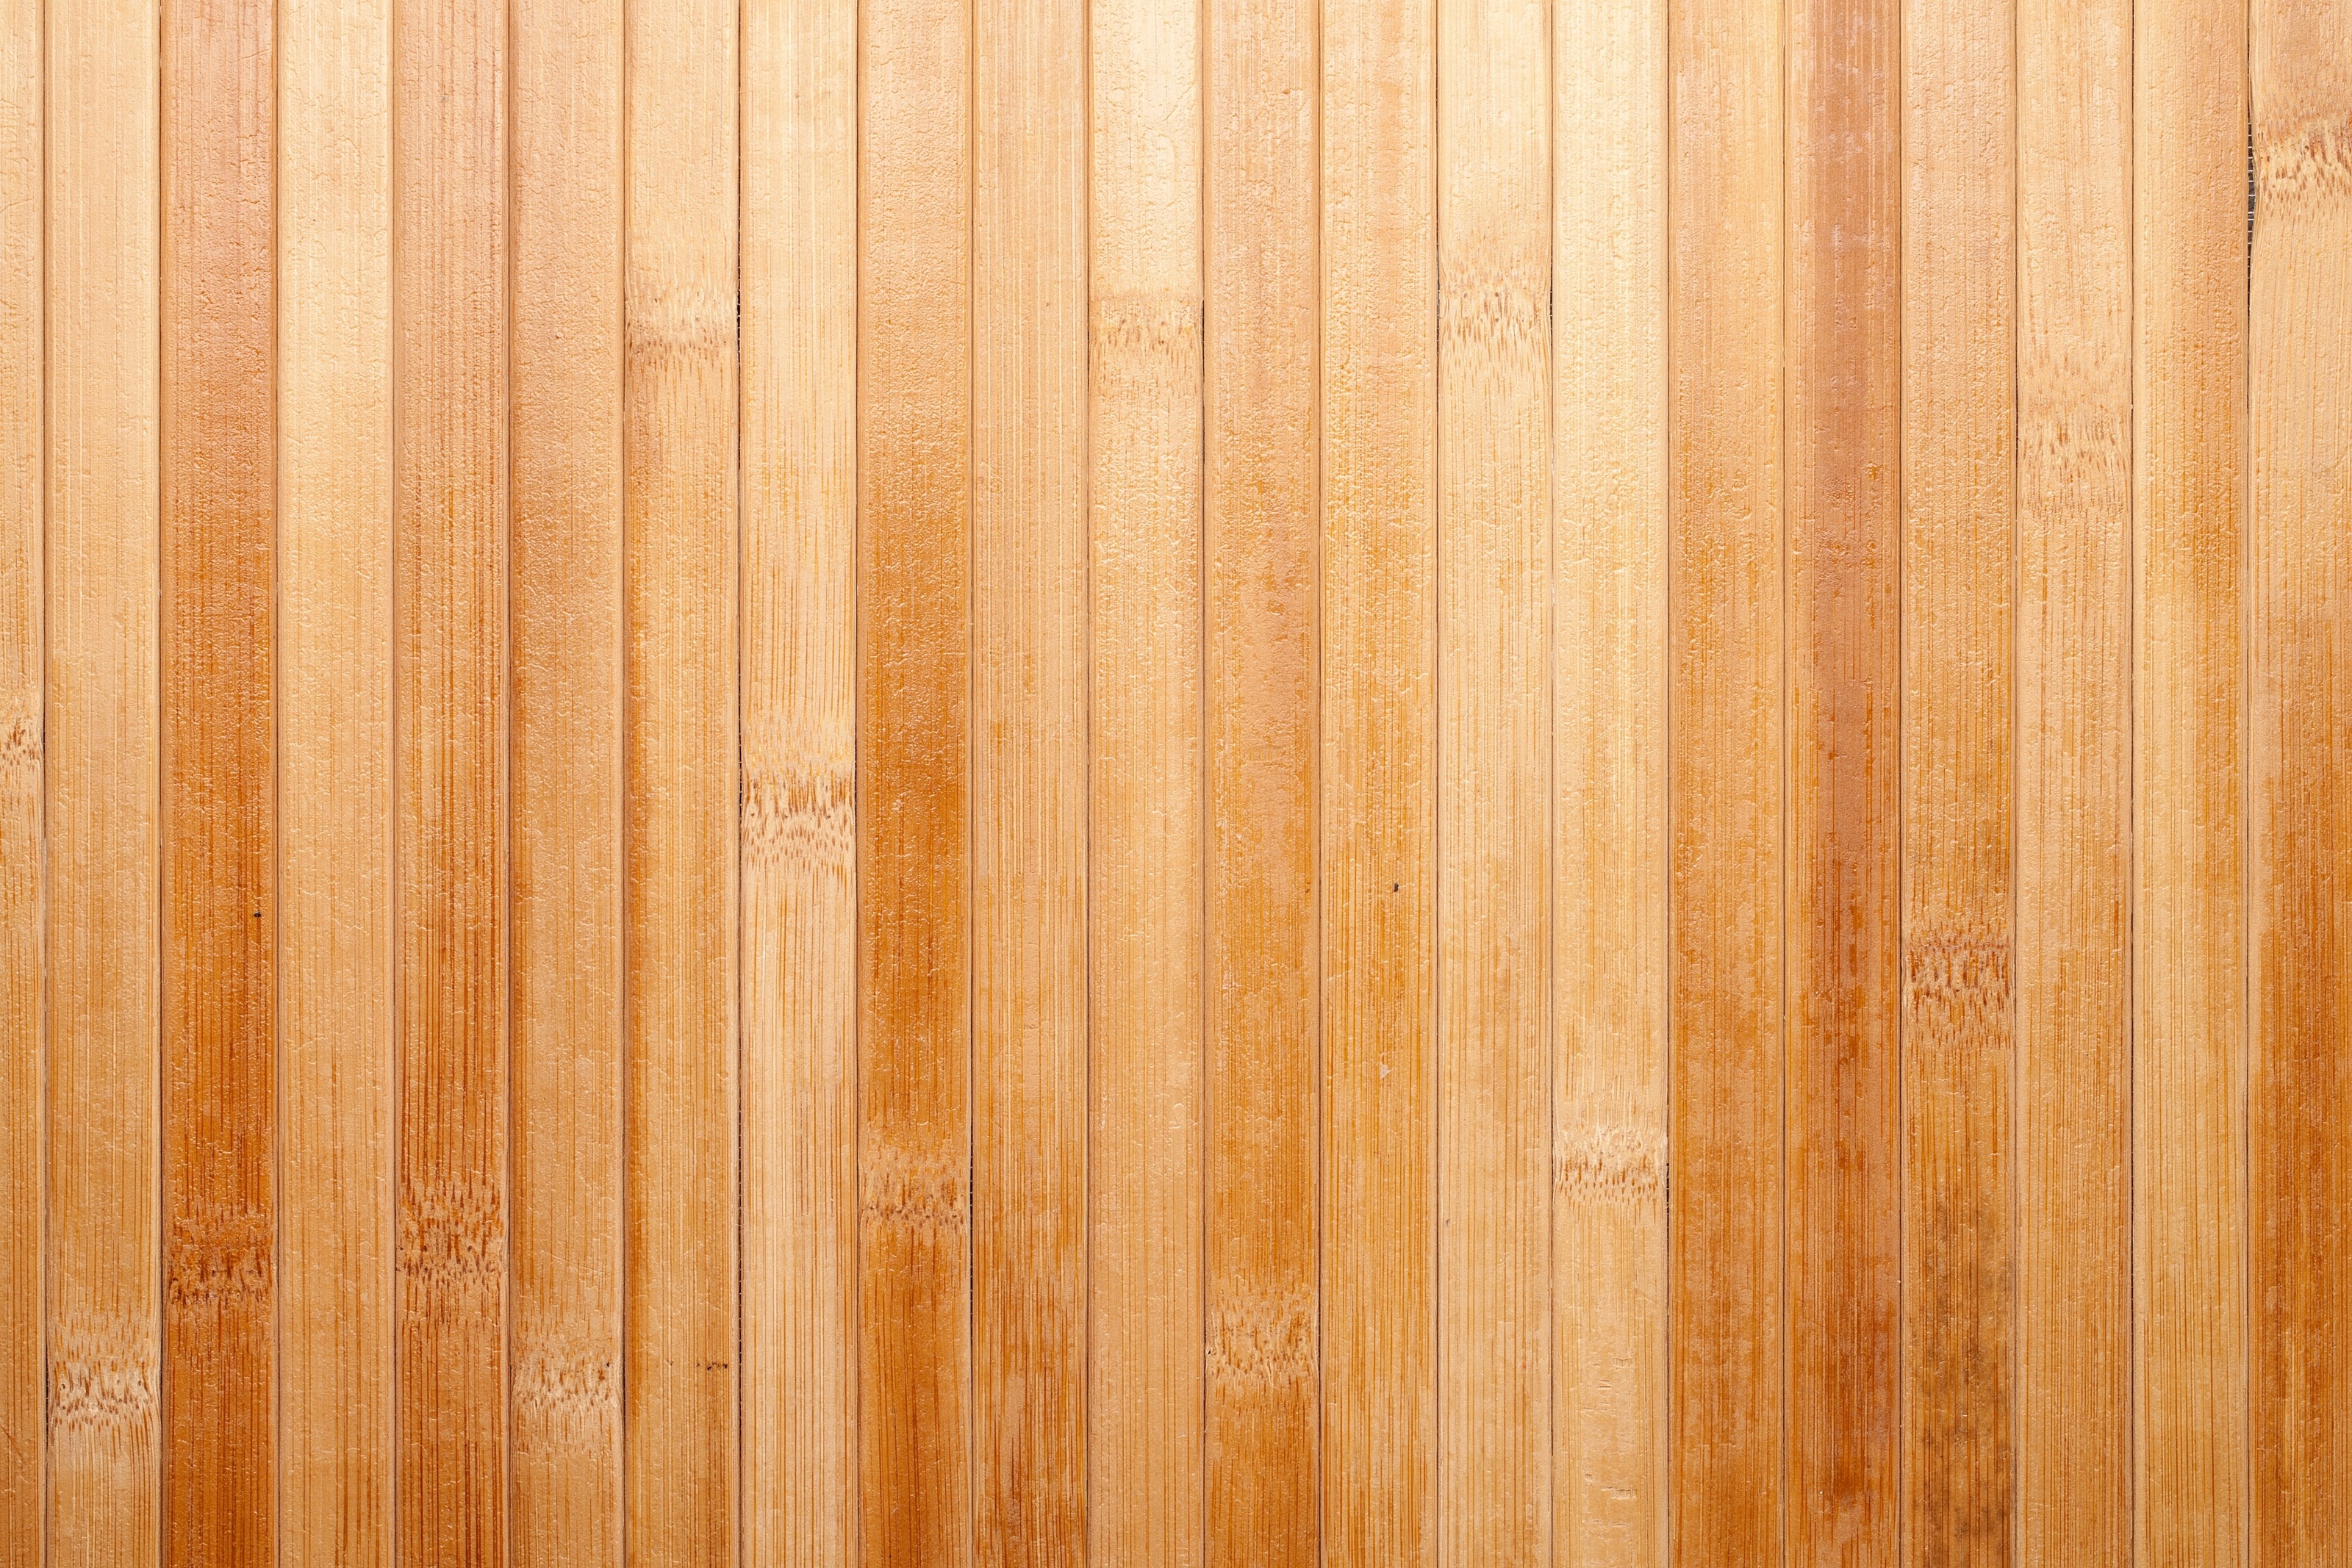 Honey Colored Wood Planks Wall Mural